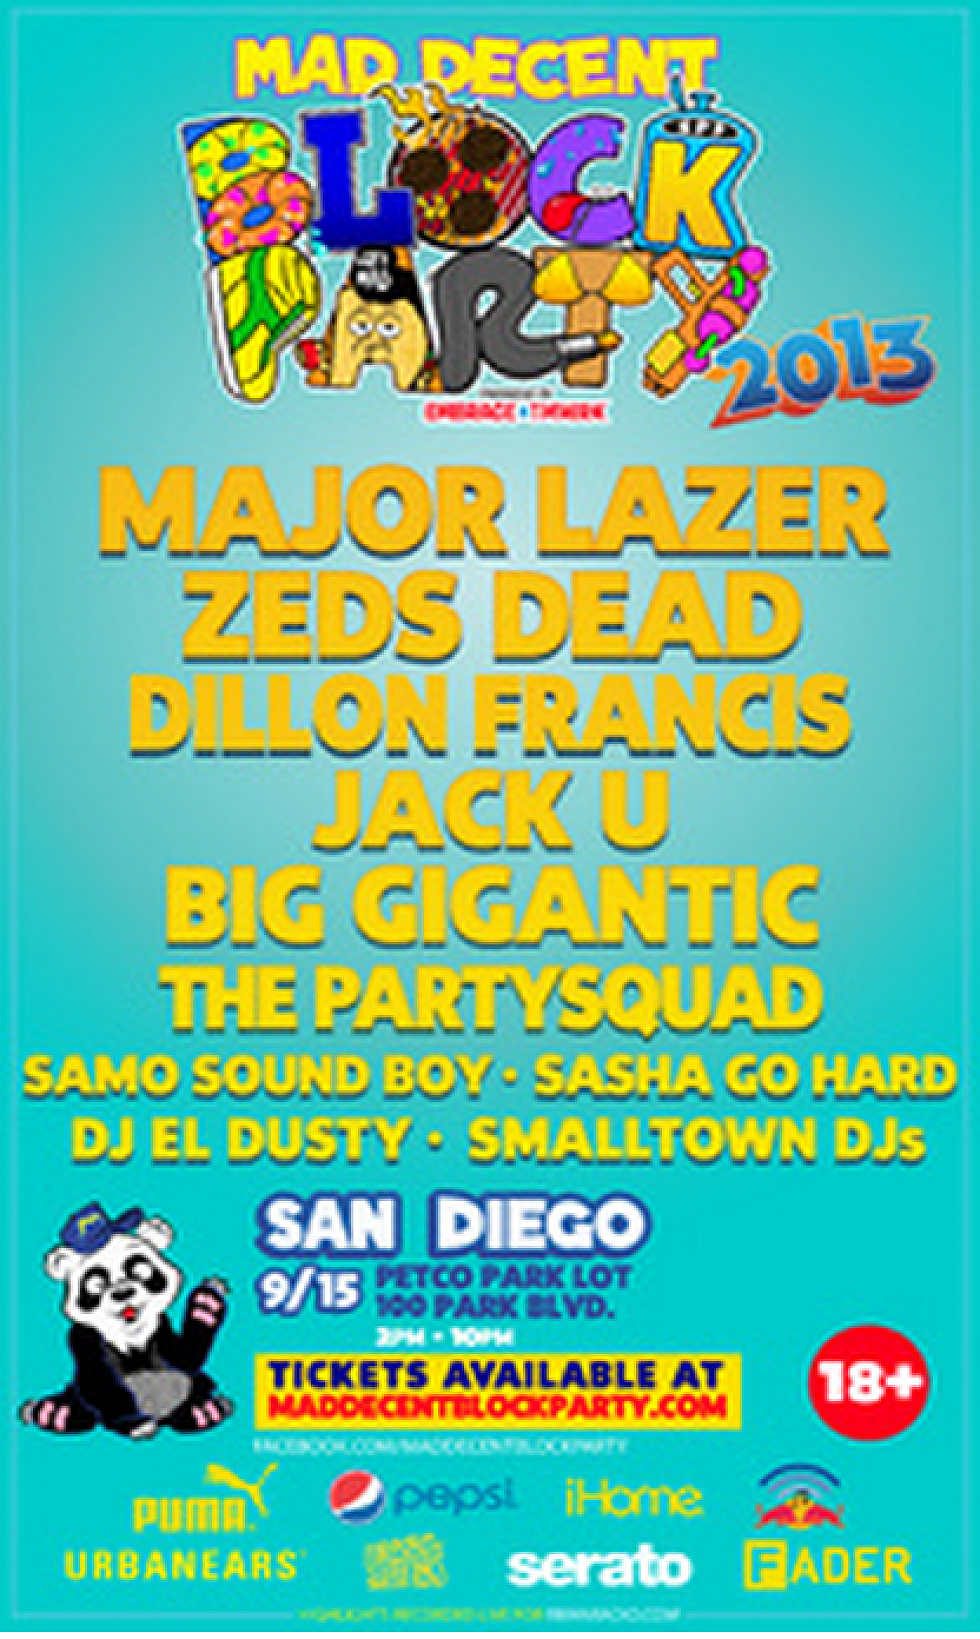 Contest: Win a chance to Meet Zeds Dead at the Mad Decent Block Party San Diego 9/15